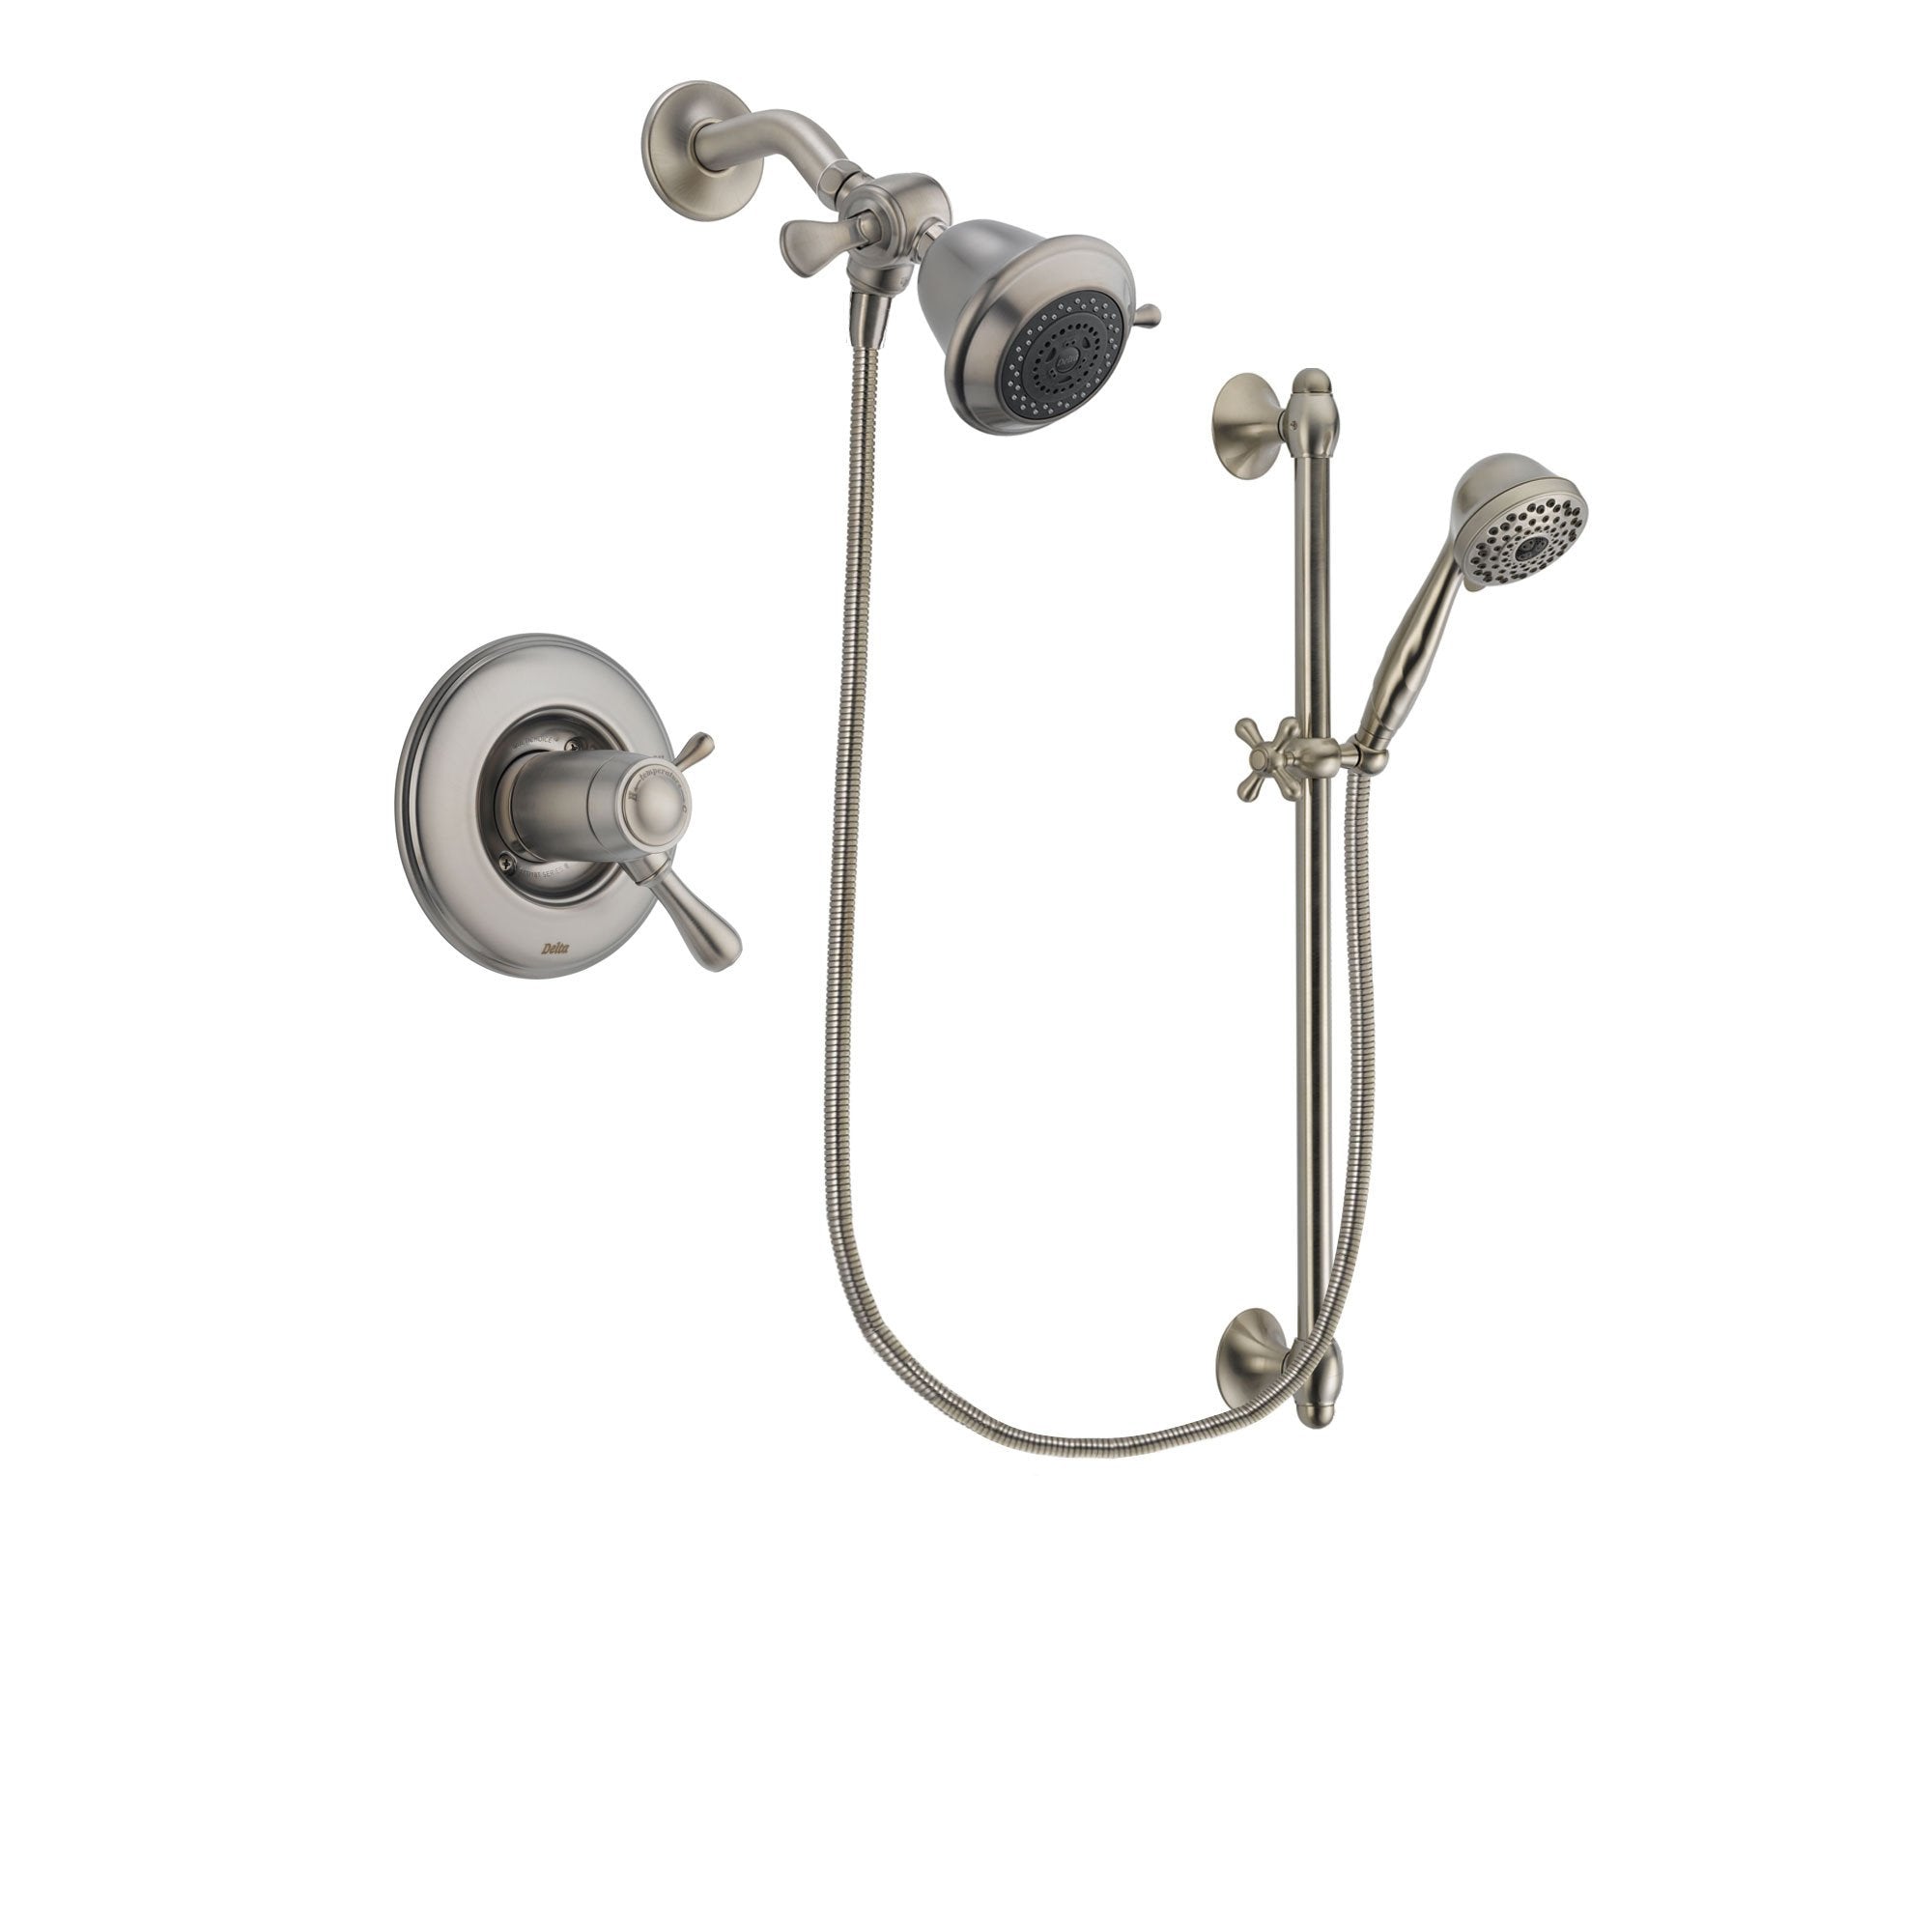 Delta Leland Stainless Steel Finish Thermostatic Shower Faucet System Package with Shower Head and 7-Spray Handheld Shower with Slide Bar Includes Rough-in Valve DSP1654V